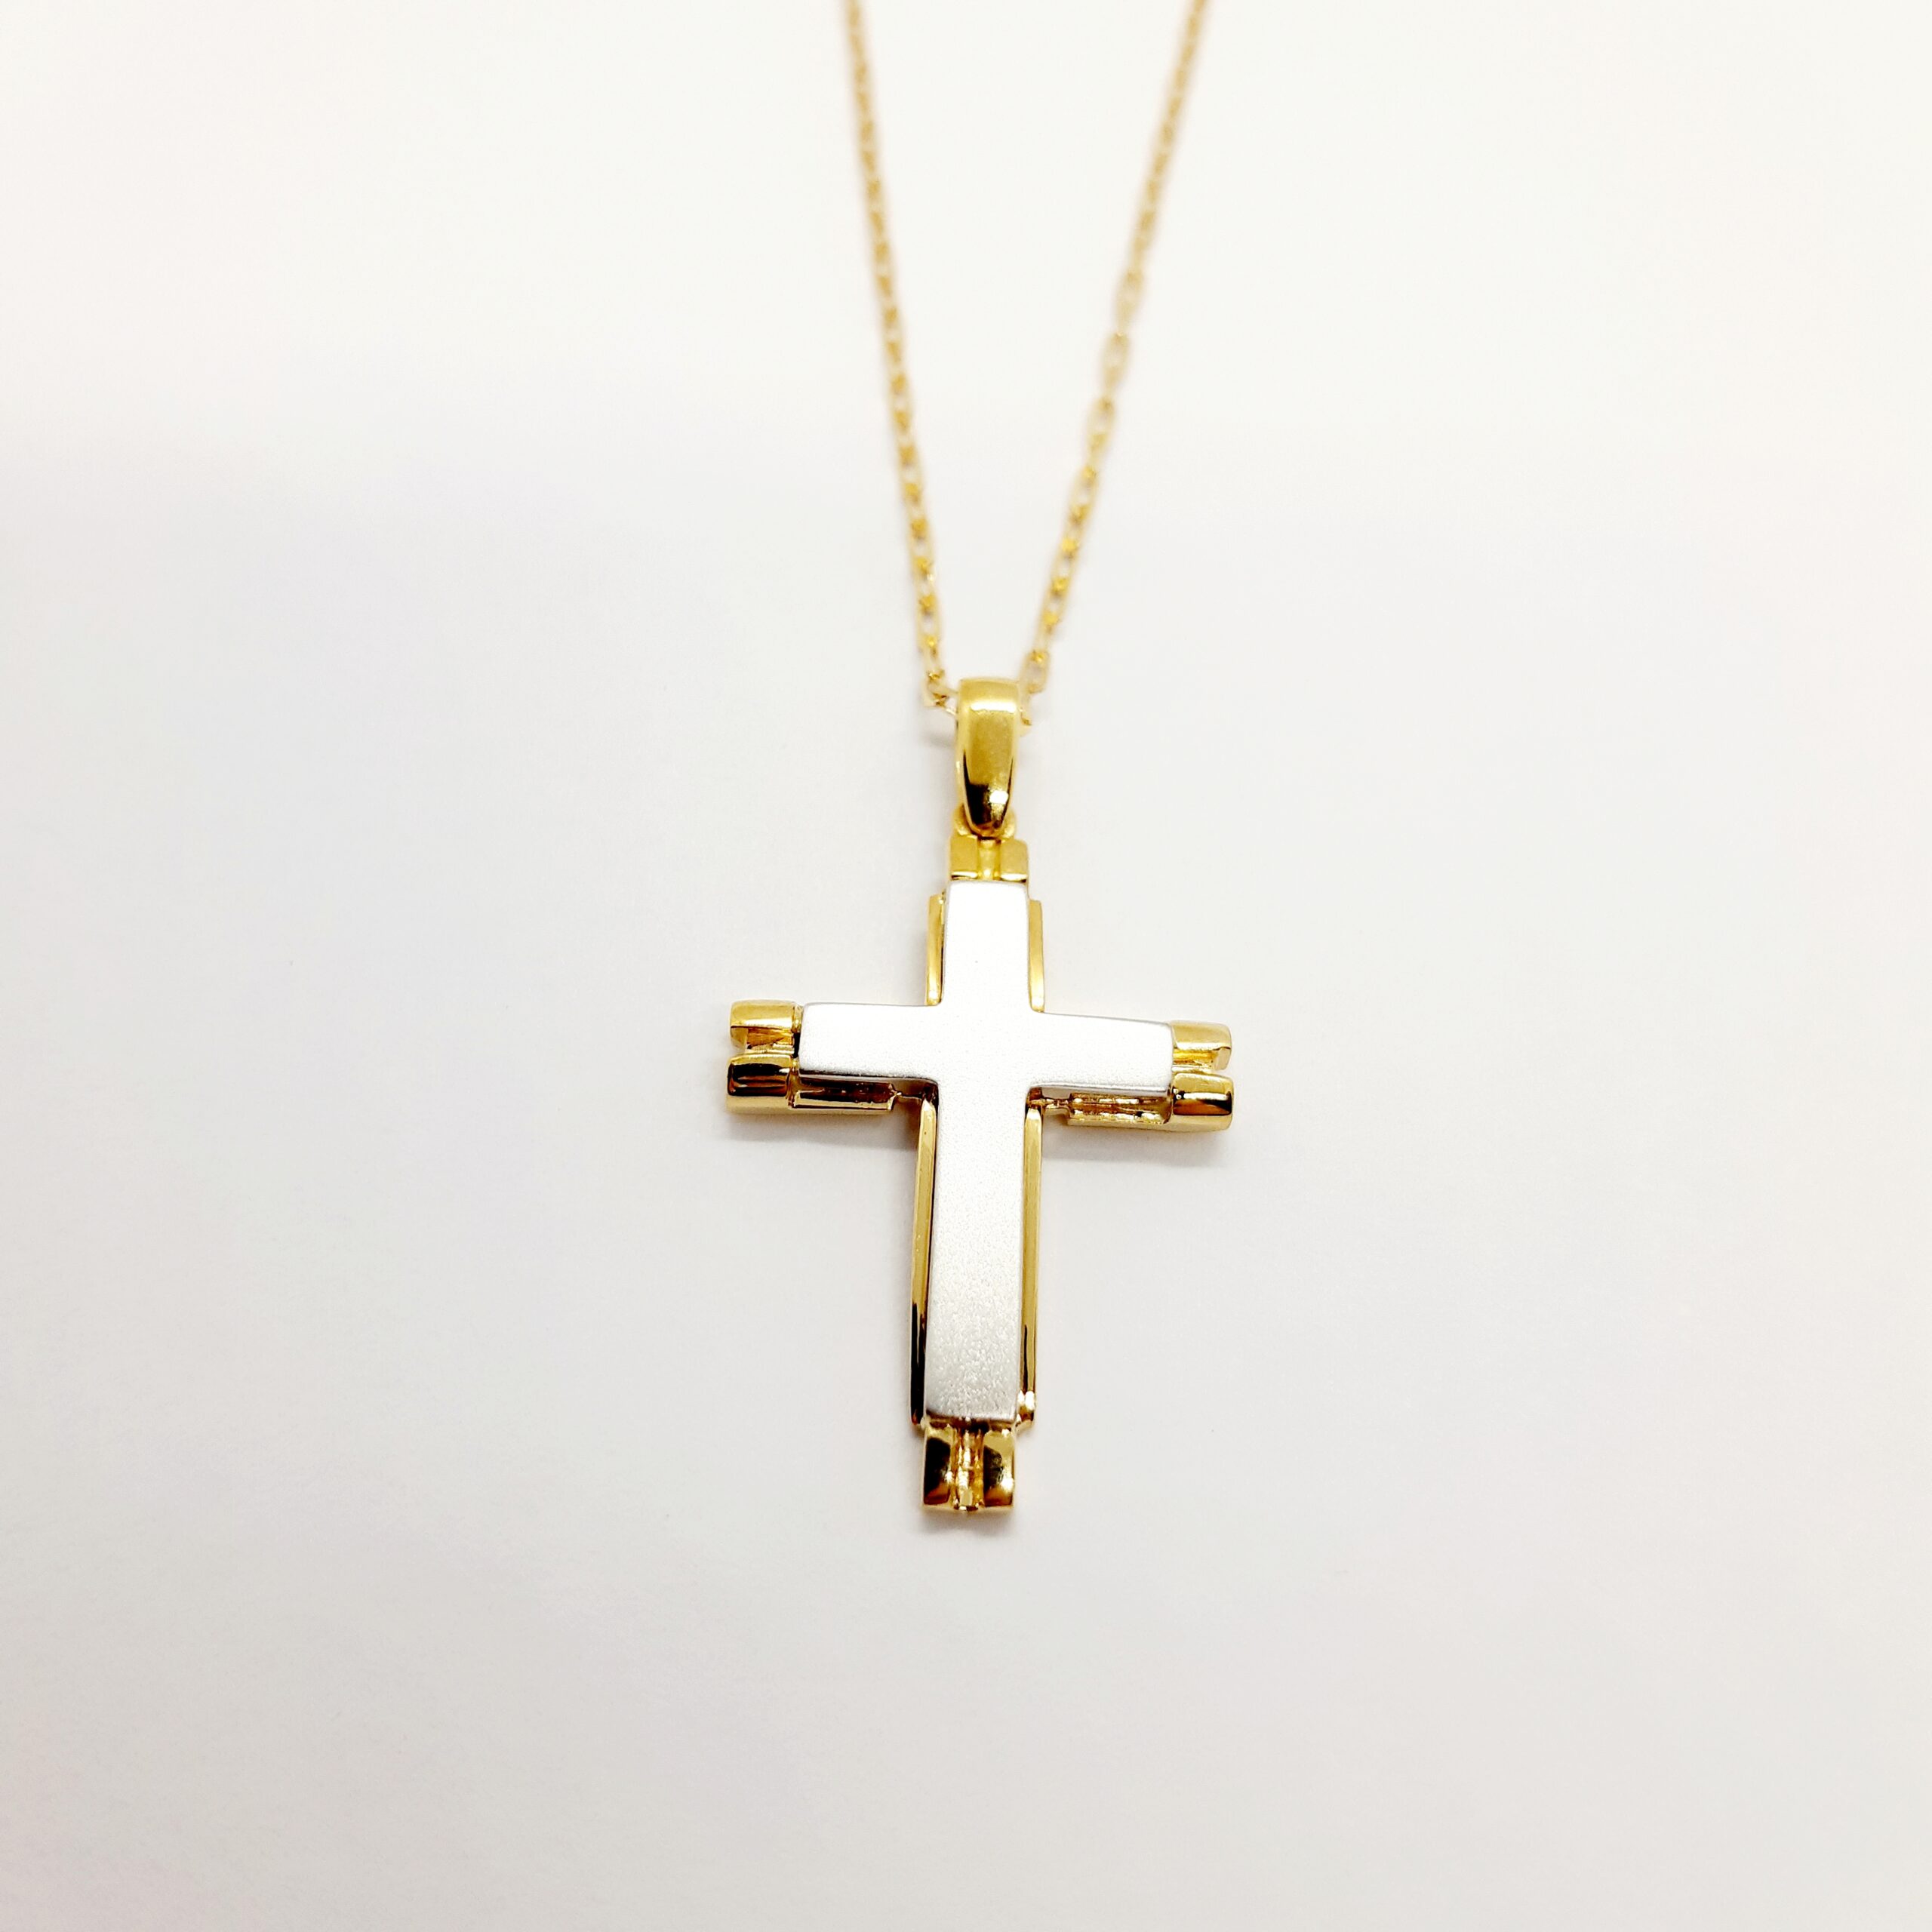 TINGN Sterling Silver Cross Necklace for Men Cross Necklace Box Chain  Baptism Religious Fathers Day Christmas Gifts for Men Boys Dad Grandpa  Boyfriend Grandson Step Dad Father-in-Law - Walmart.com